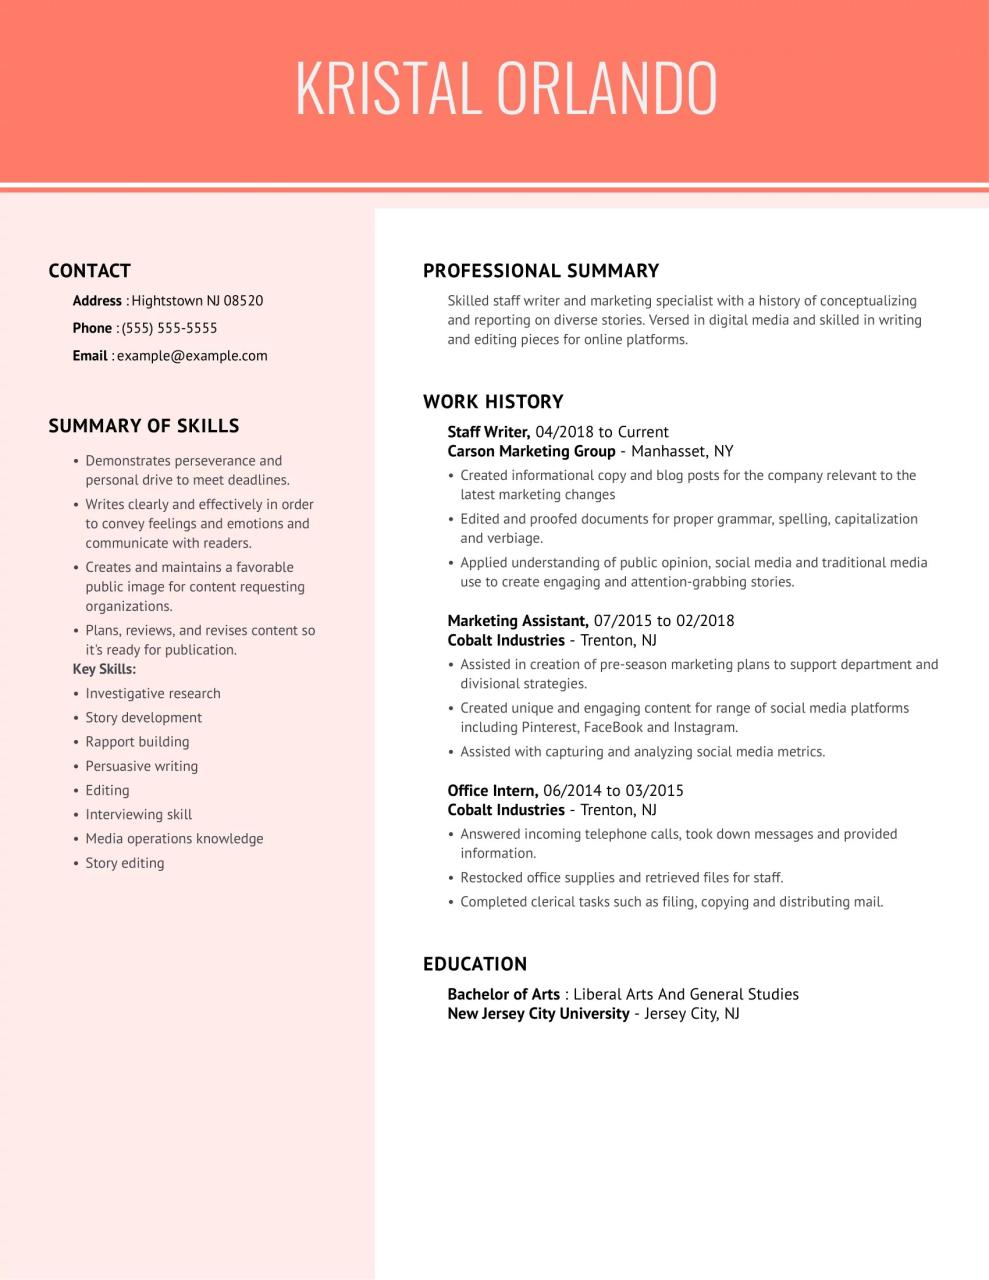 How To Make A Resume For Freelance